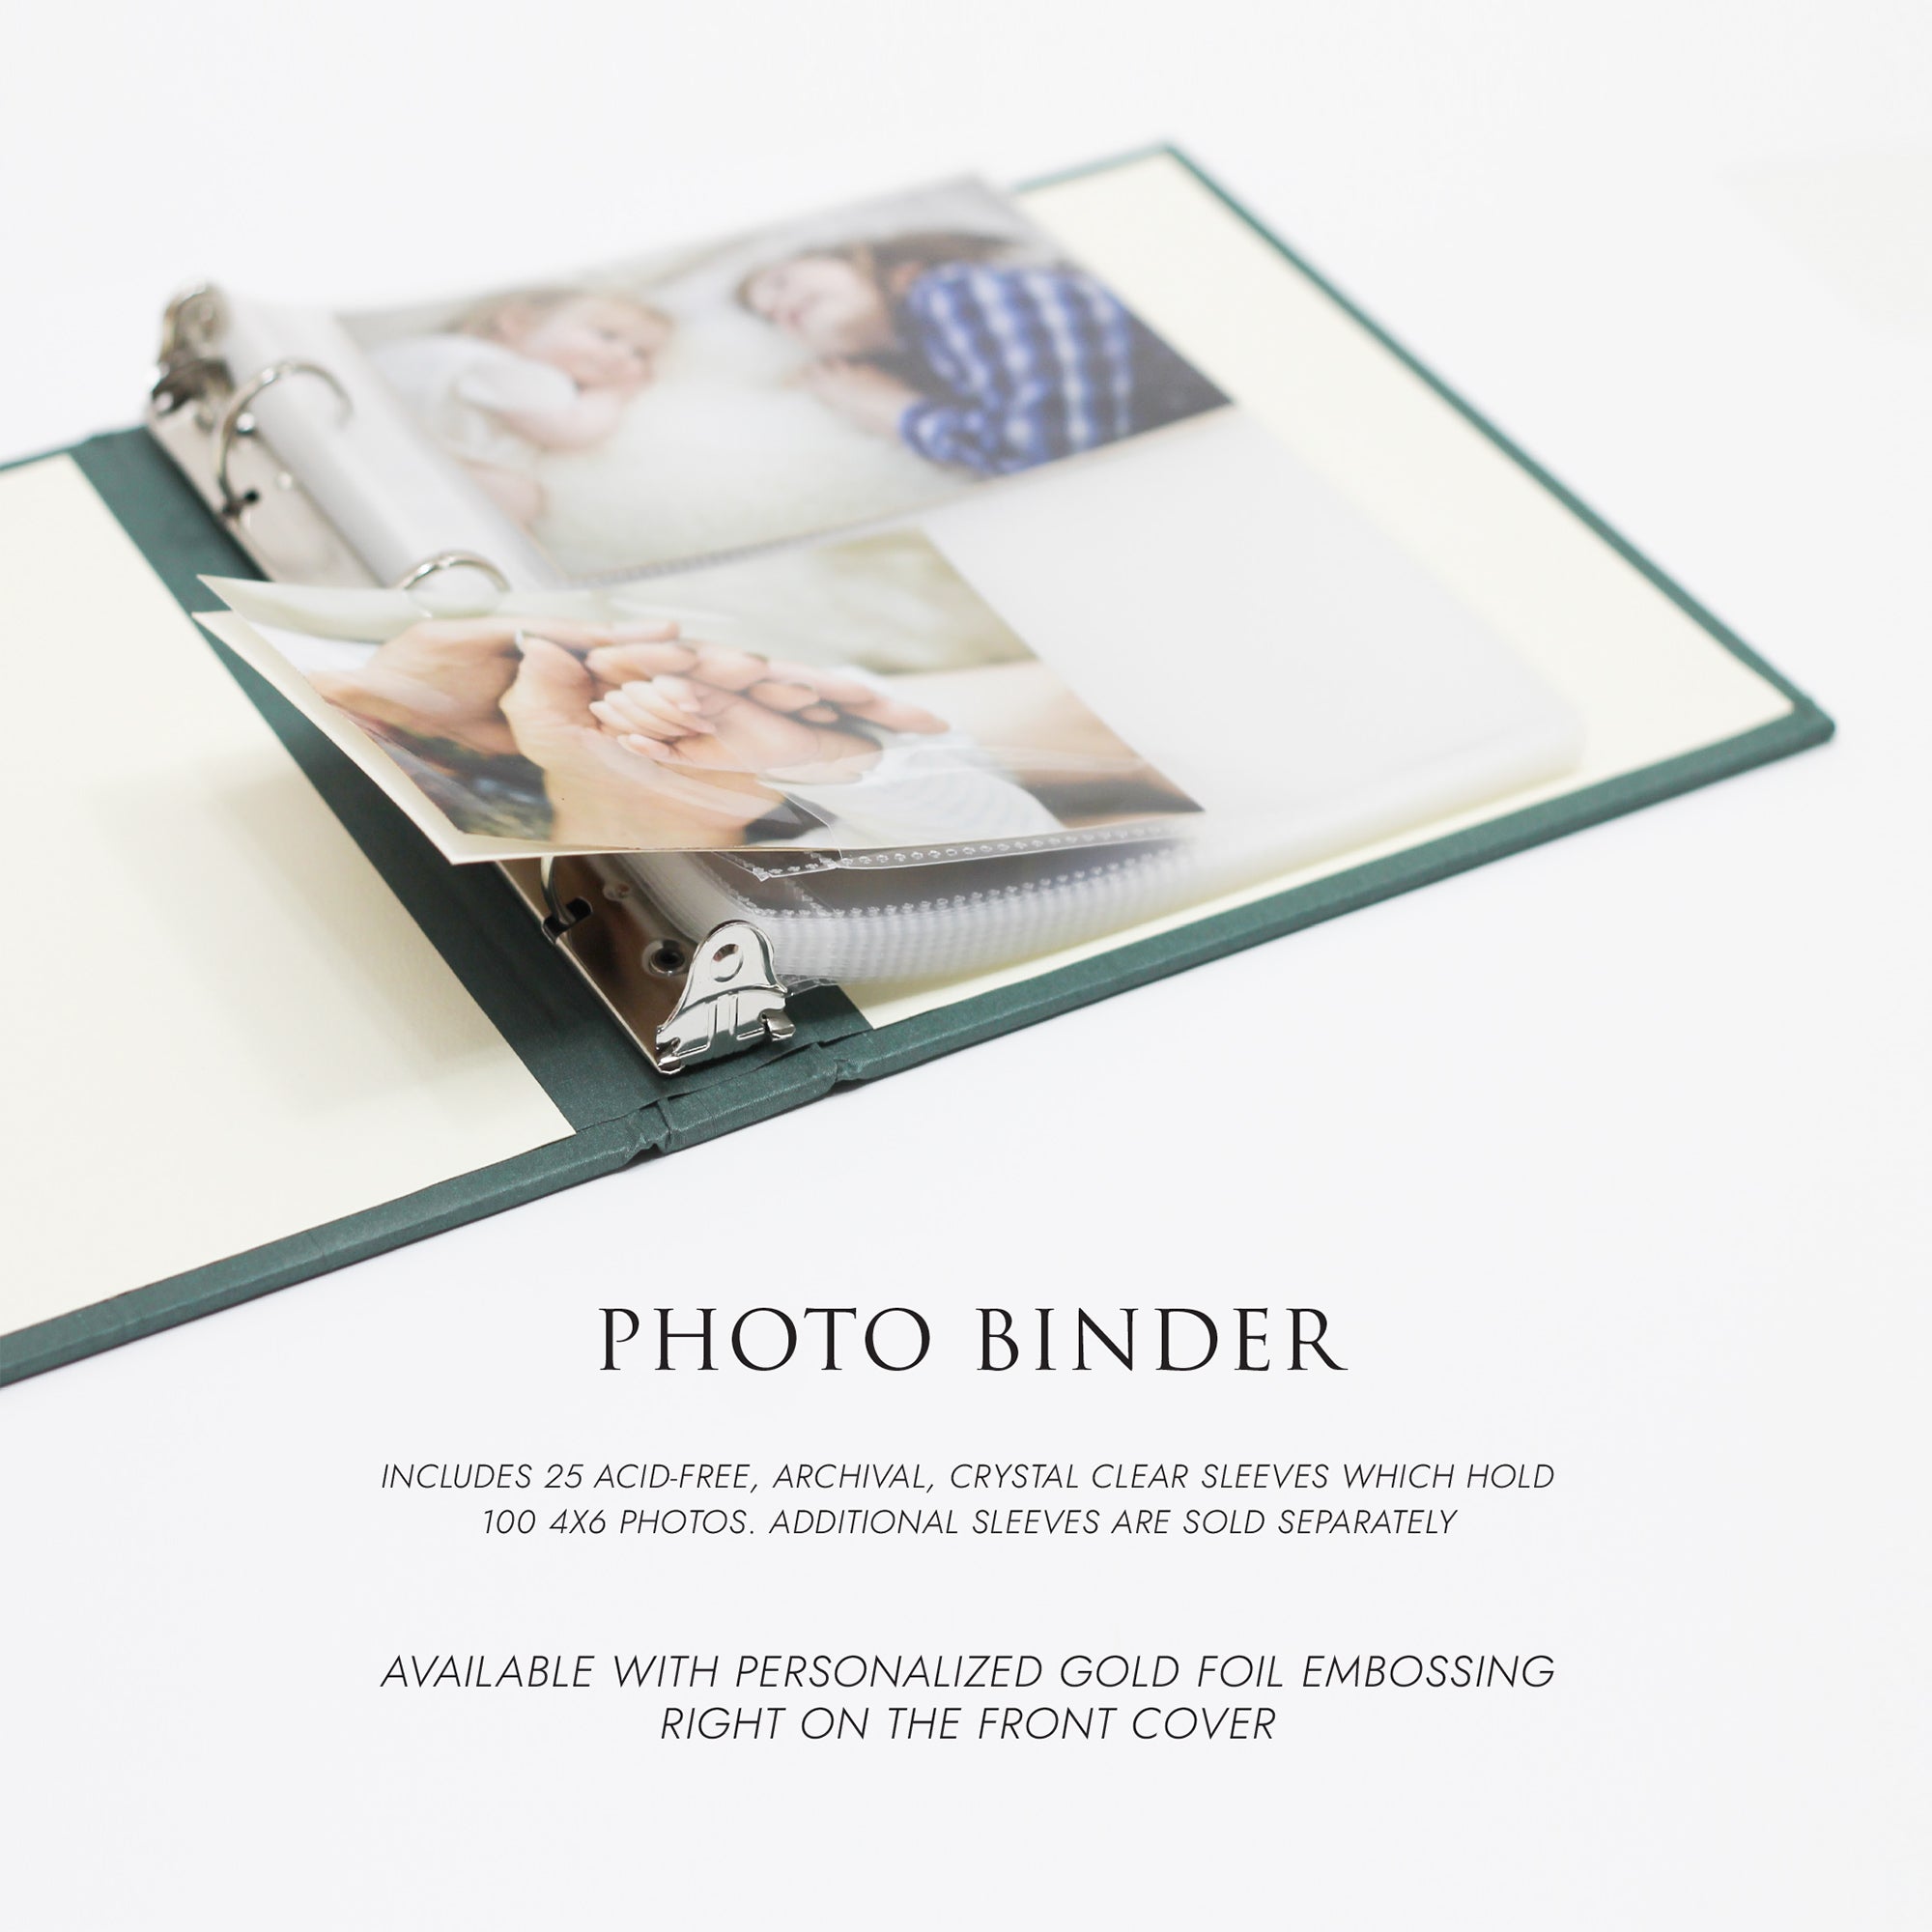 Bulk 4 x 6 Refill Pages for 12 x 12 Photo Album Binders